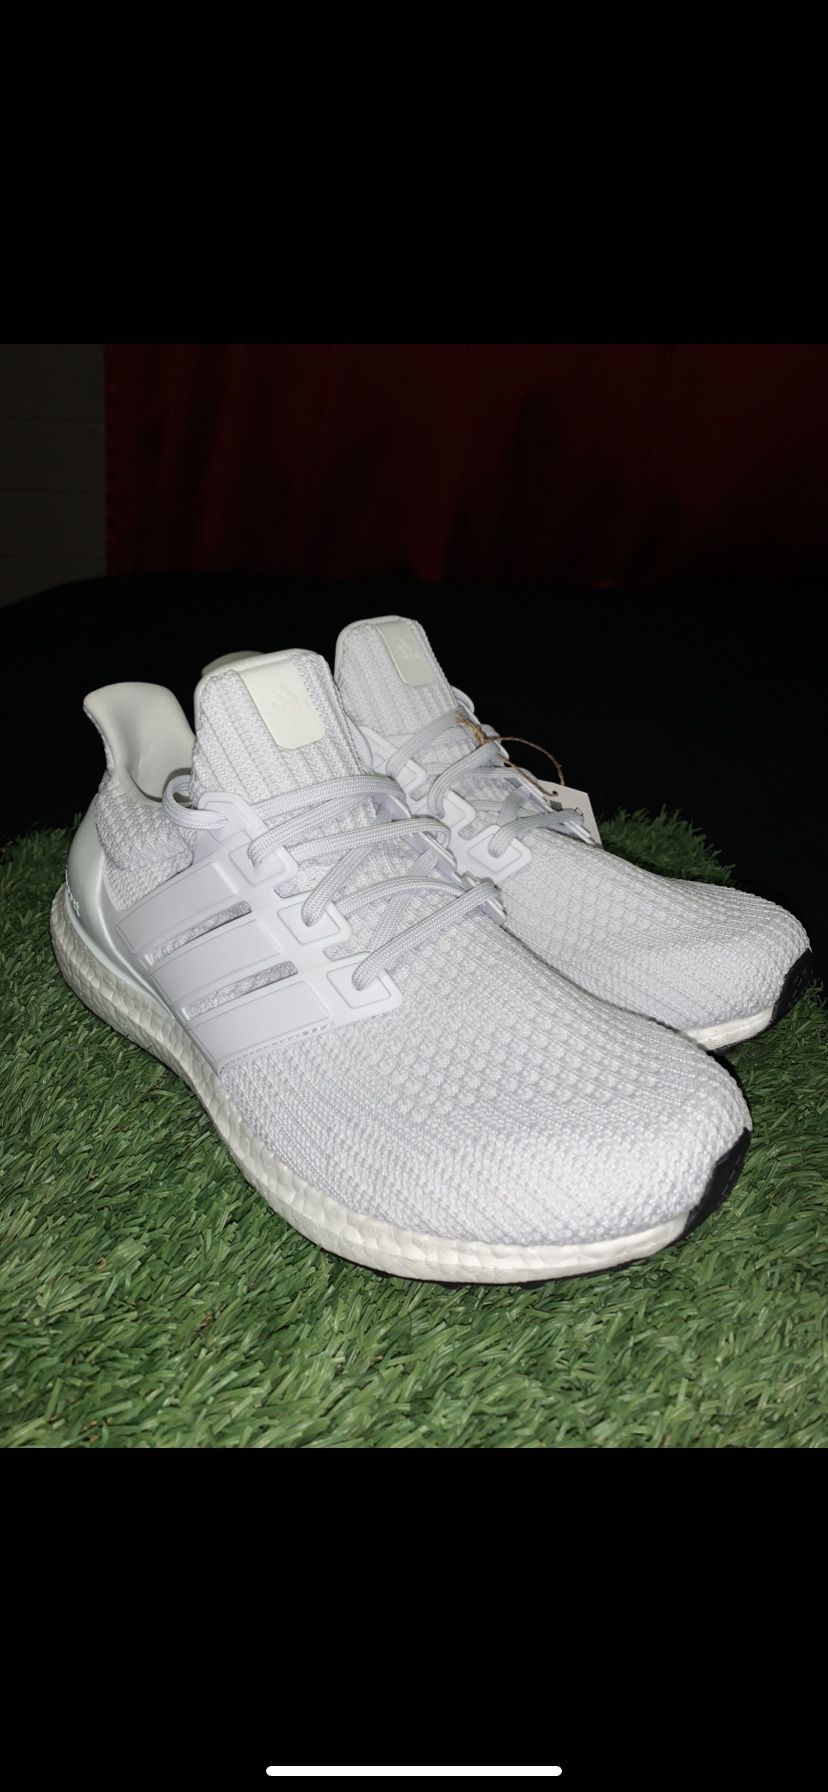 -Adidas Ultraboost 4.0 DNA White-Size 12 $130 